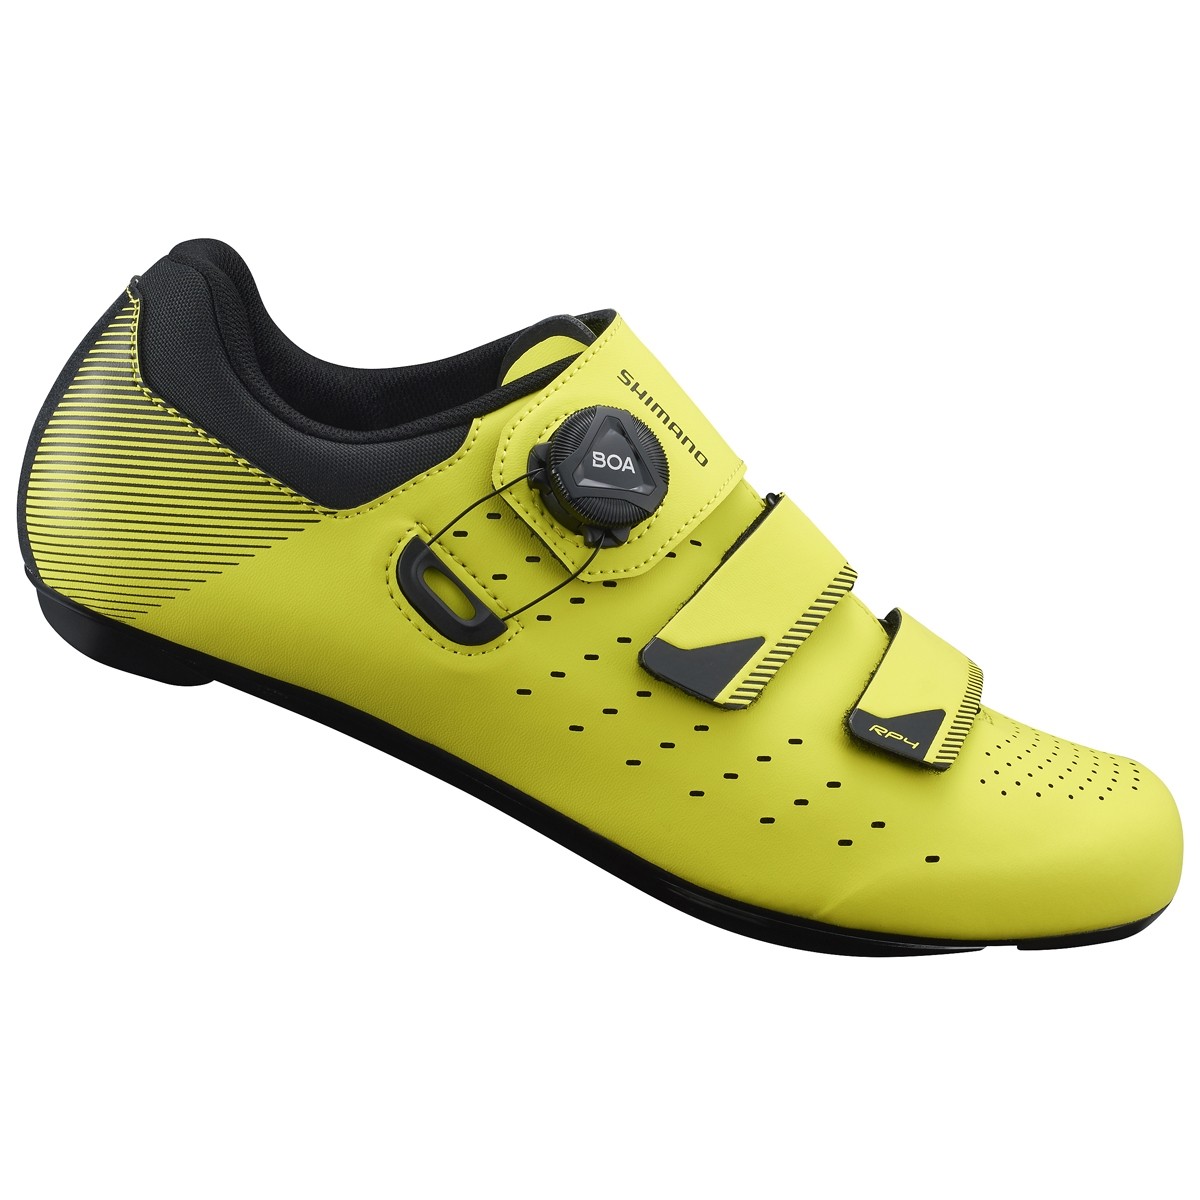 Shimano rp400 chaussures route neon jaune